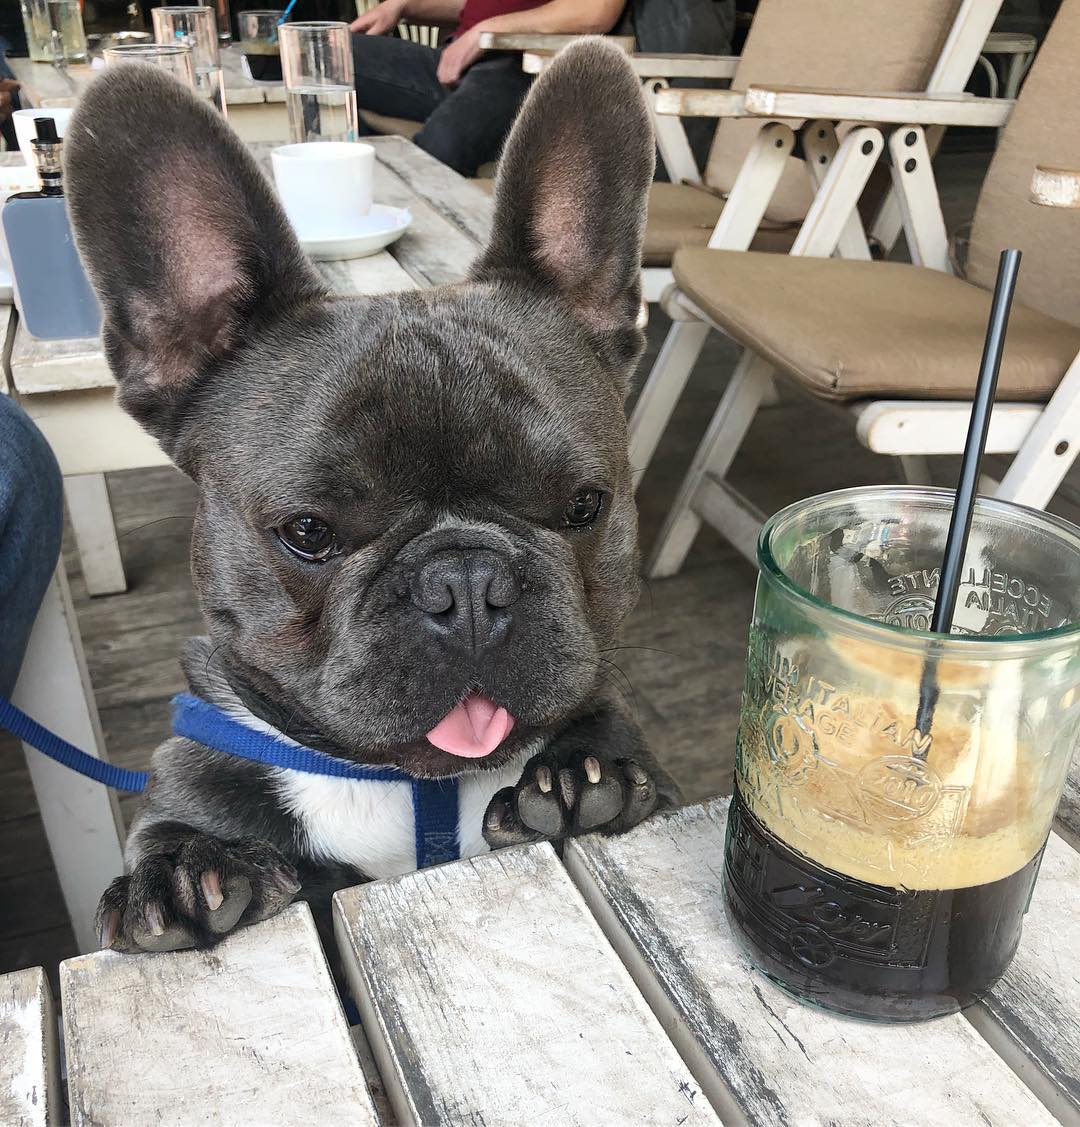 But first....coffee ☕️

#frenchbulldog #frenchielover #dogsoftwitter #doglovers #usa